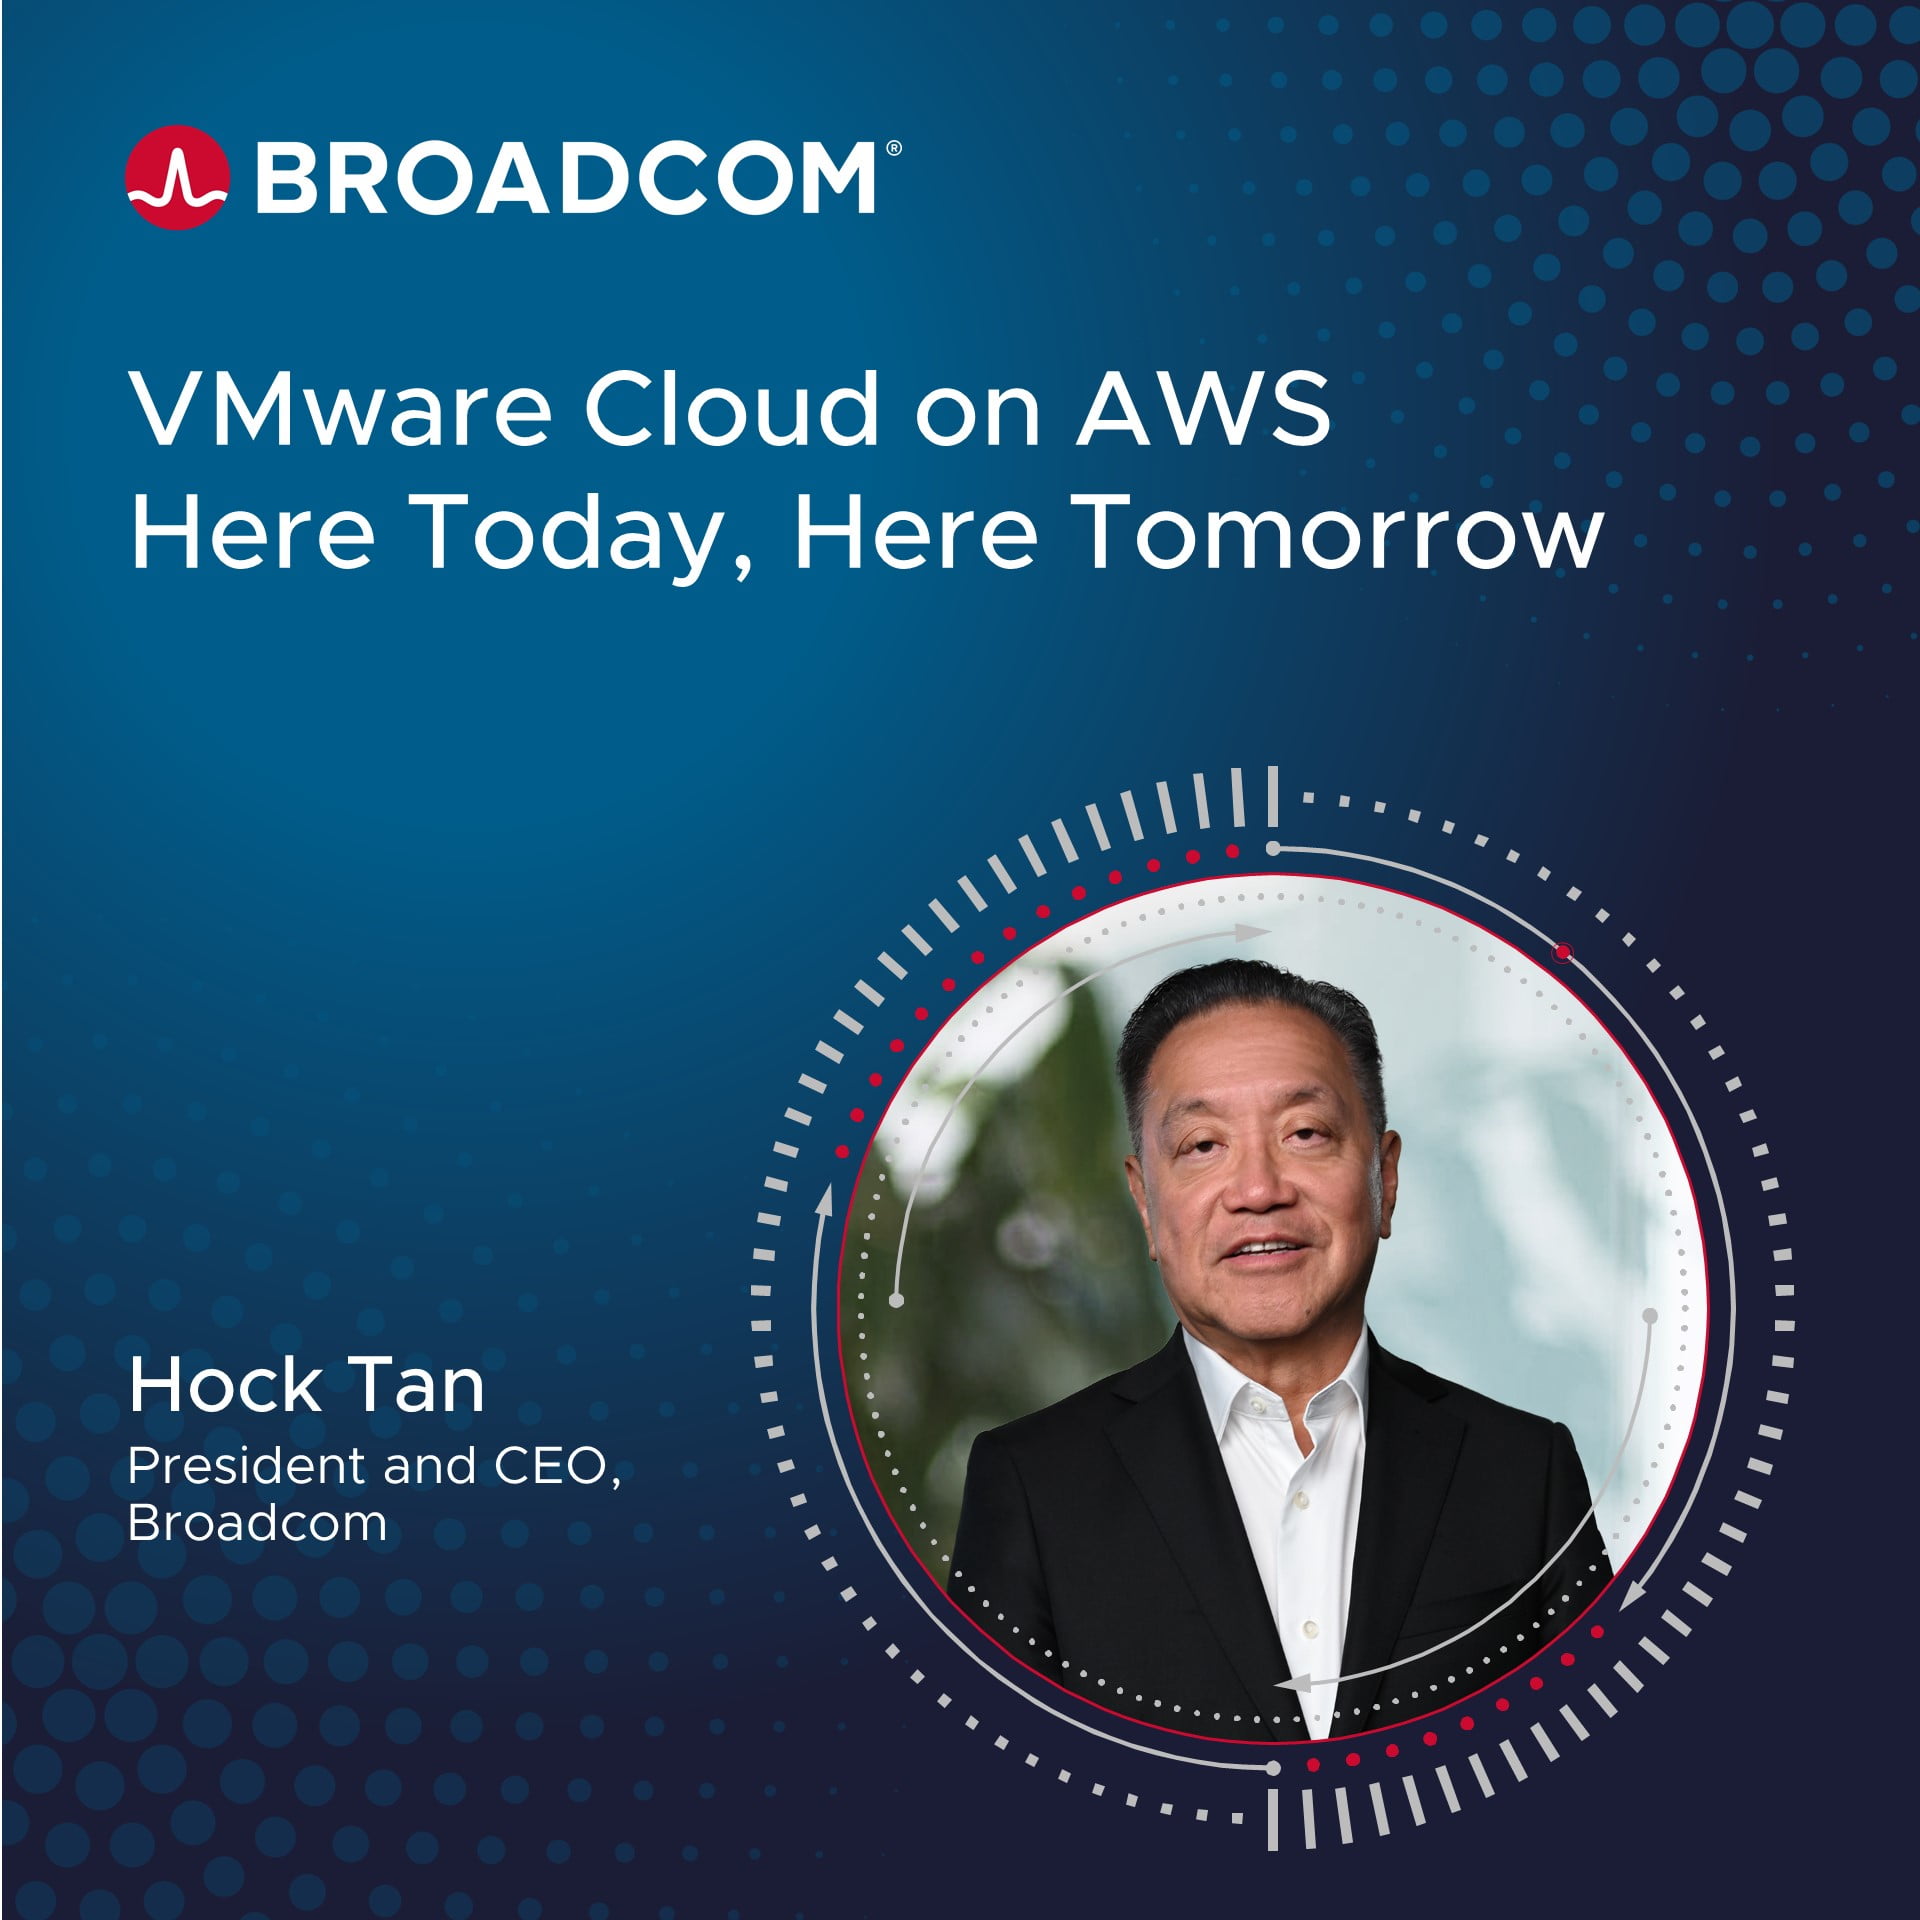 There have been false reports that VMware Cloud on AWS may be going away, which is causing unnecessary concern for our loyal customers who have used t